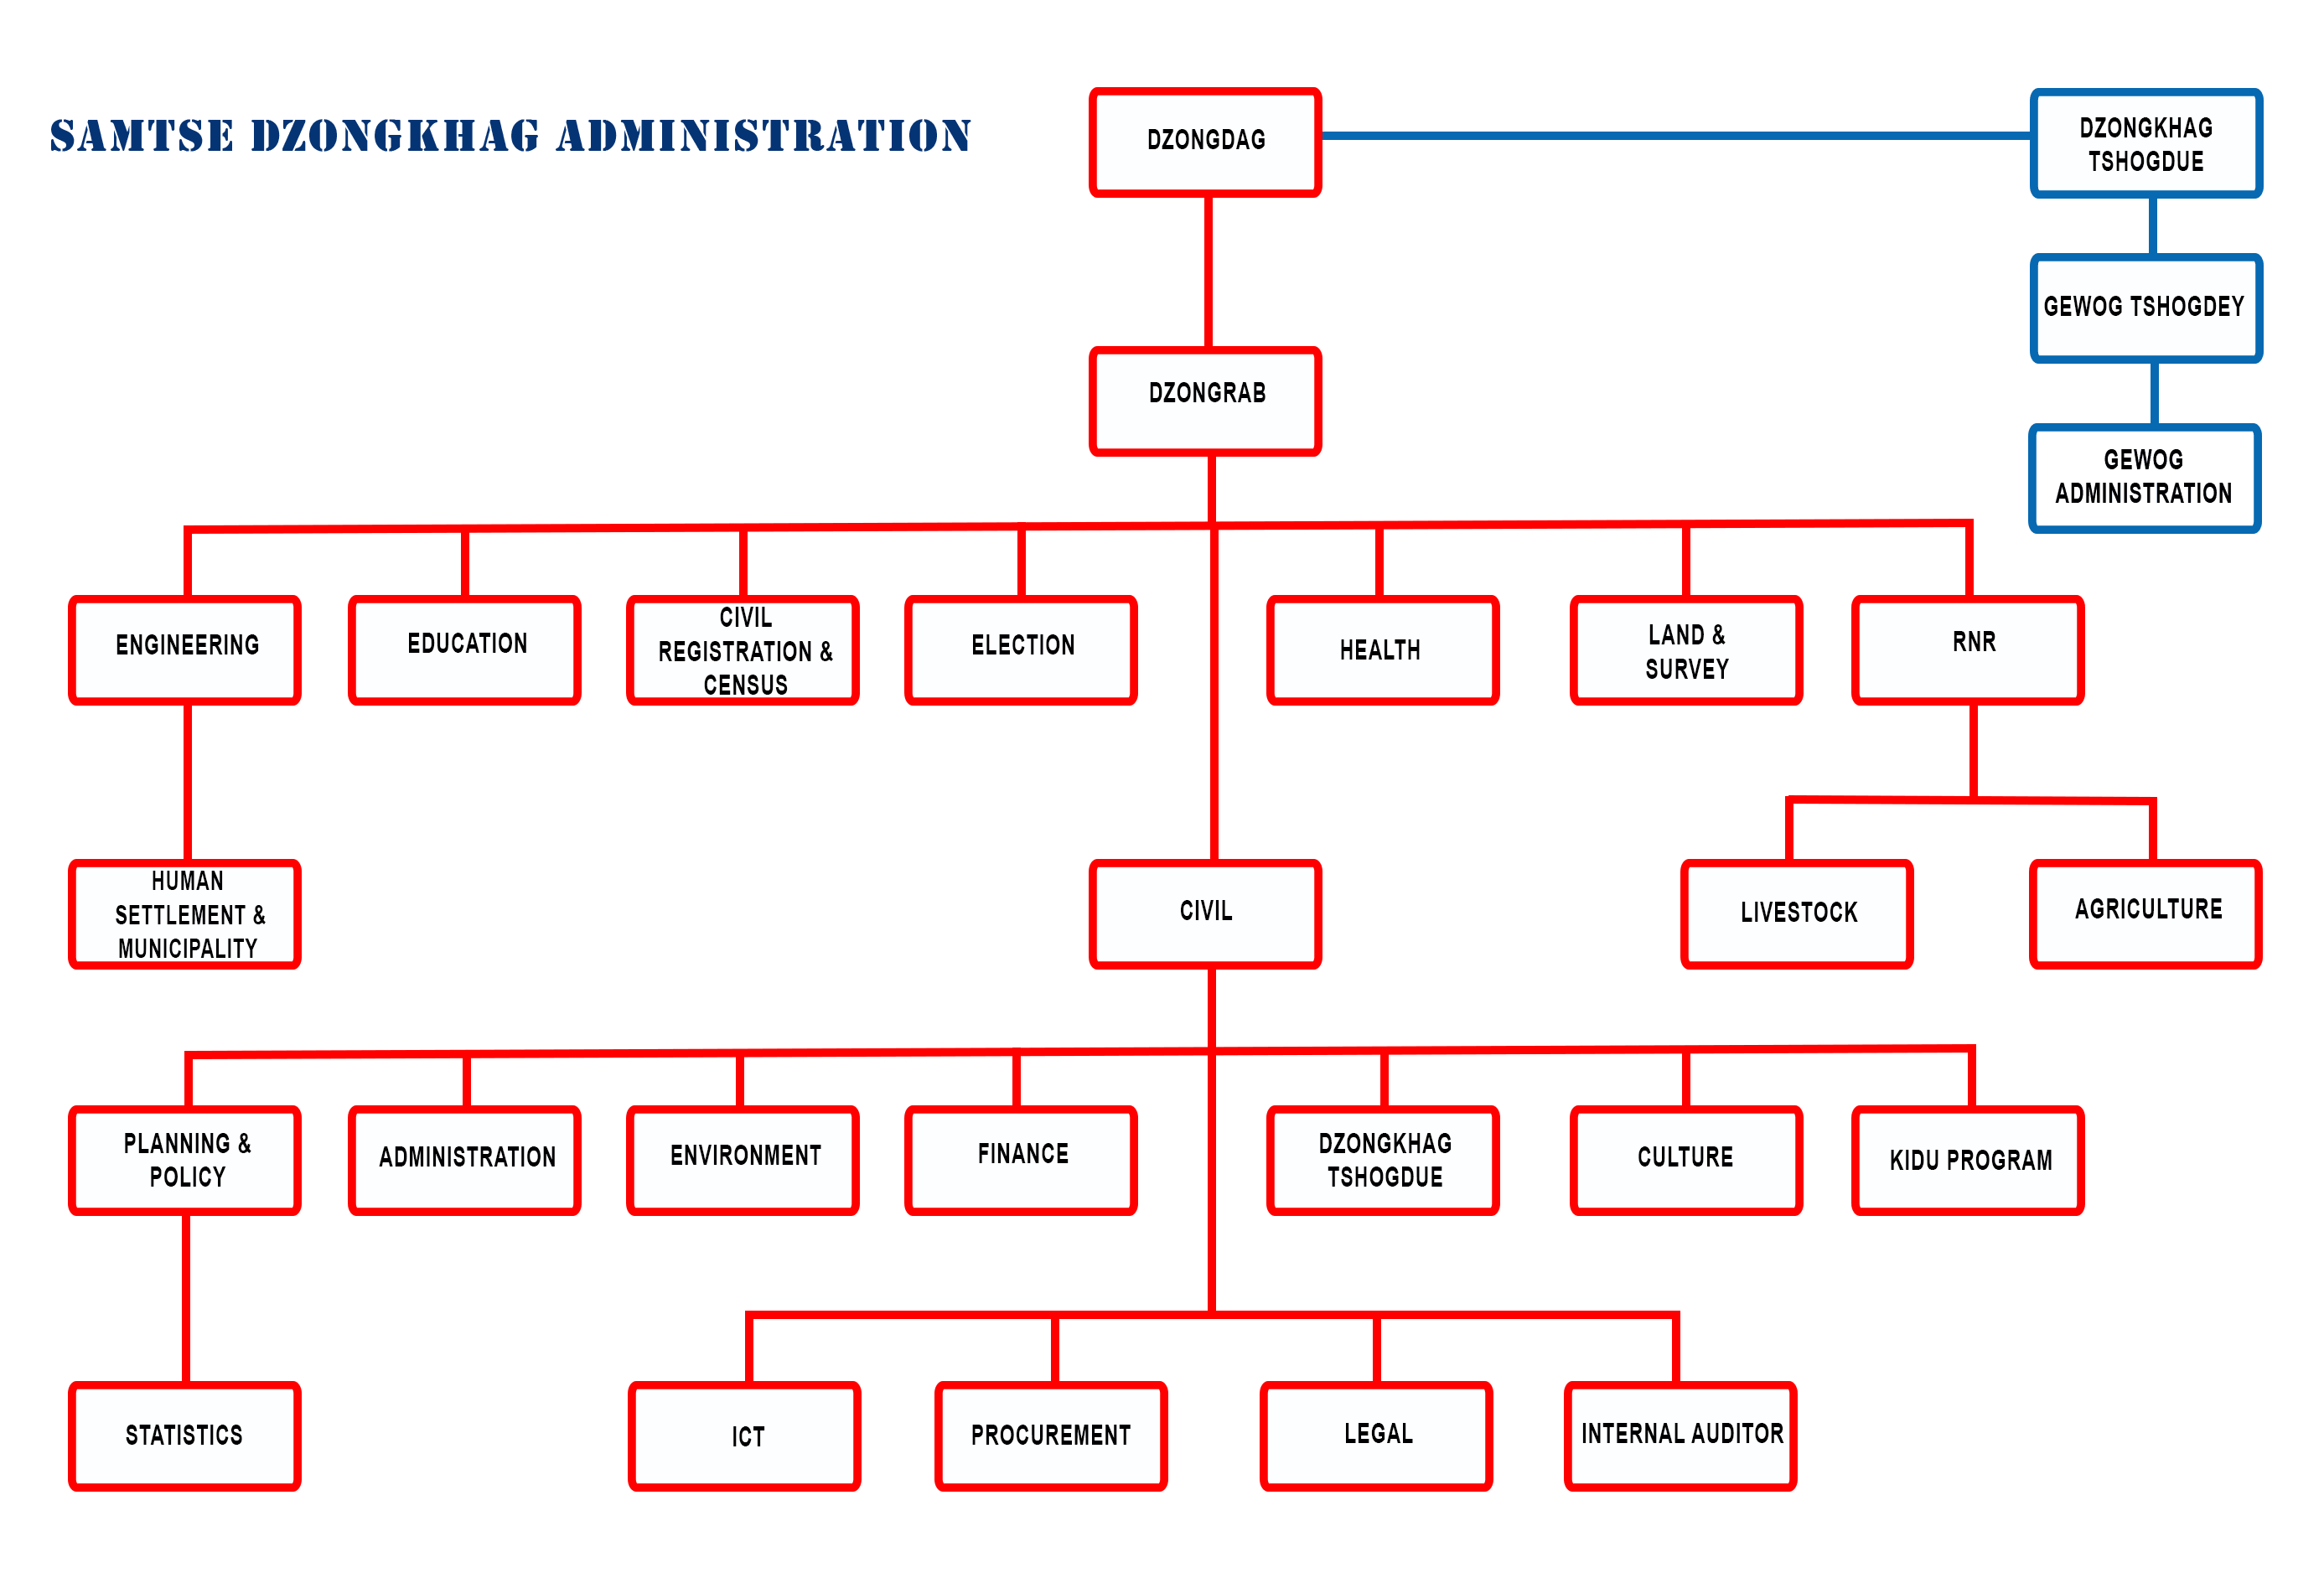 structure of an organization and the relationships between the different Sectors.